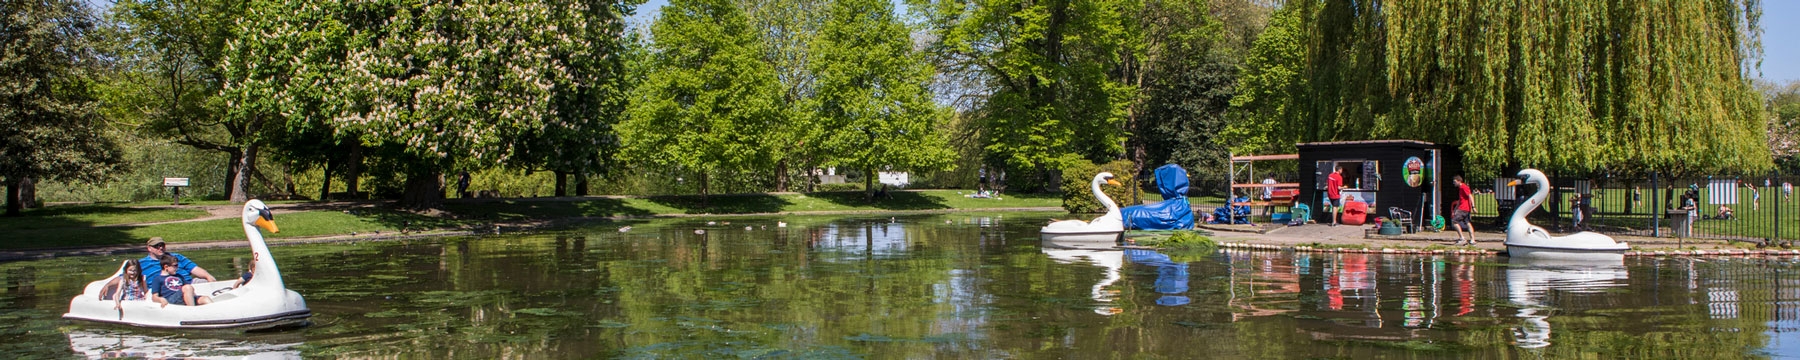 The boating lake at Colchester Castle Park